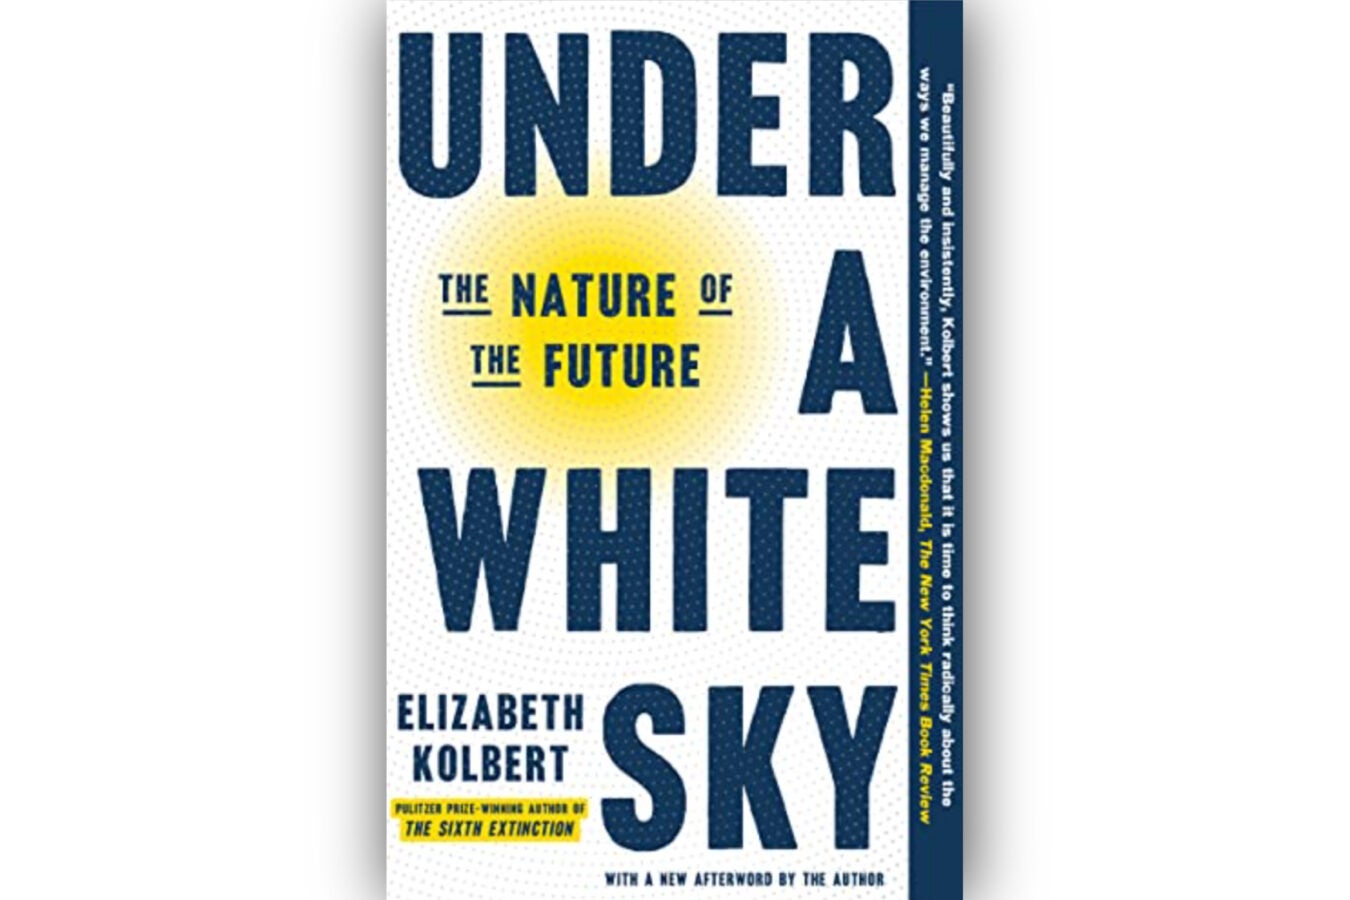 Book cover: “Under A White Sky: The Nature of the Future” by Elizabeth Kolbert.